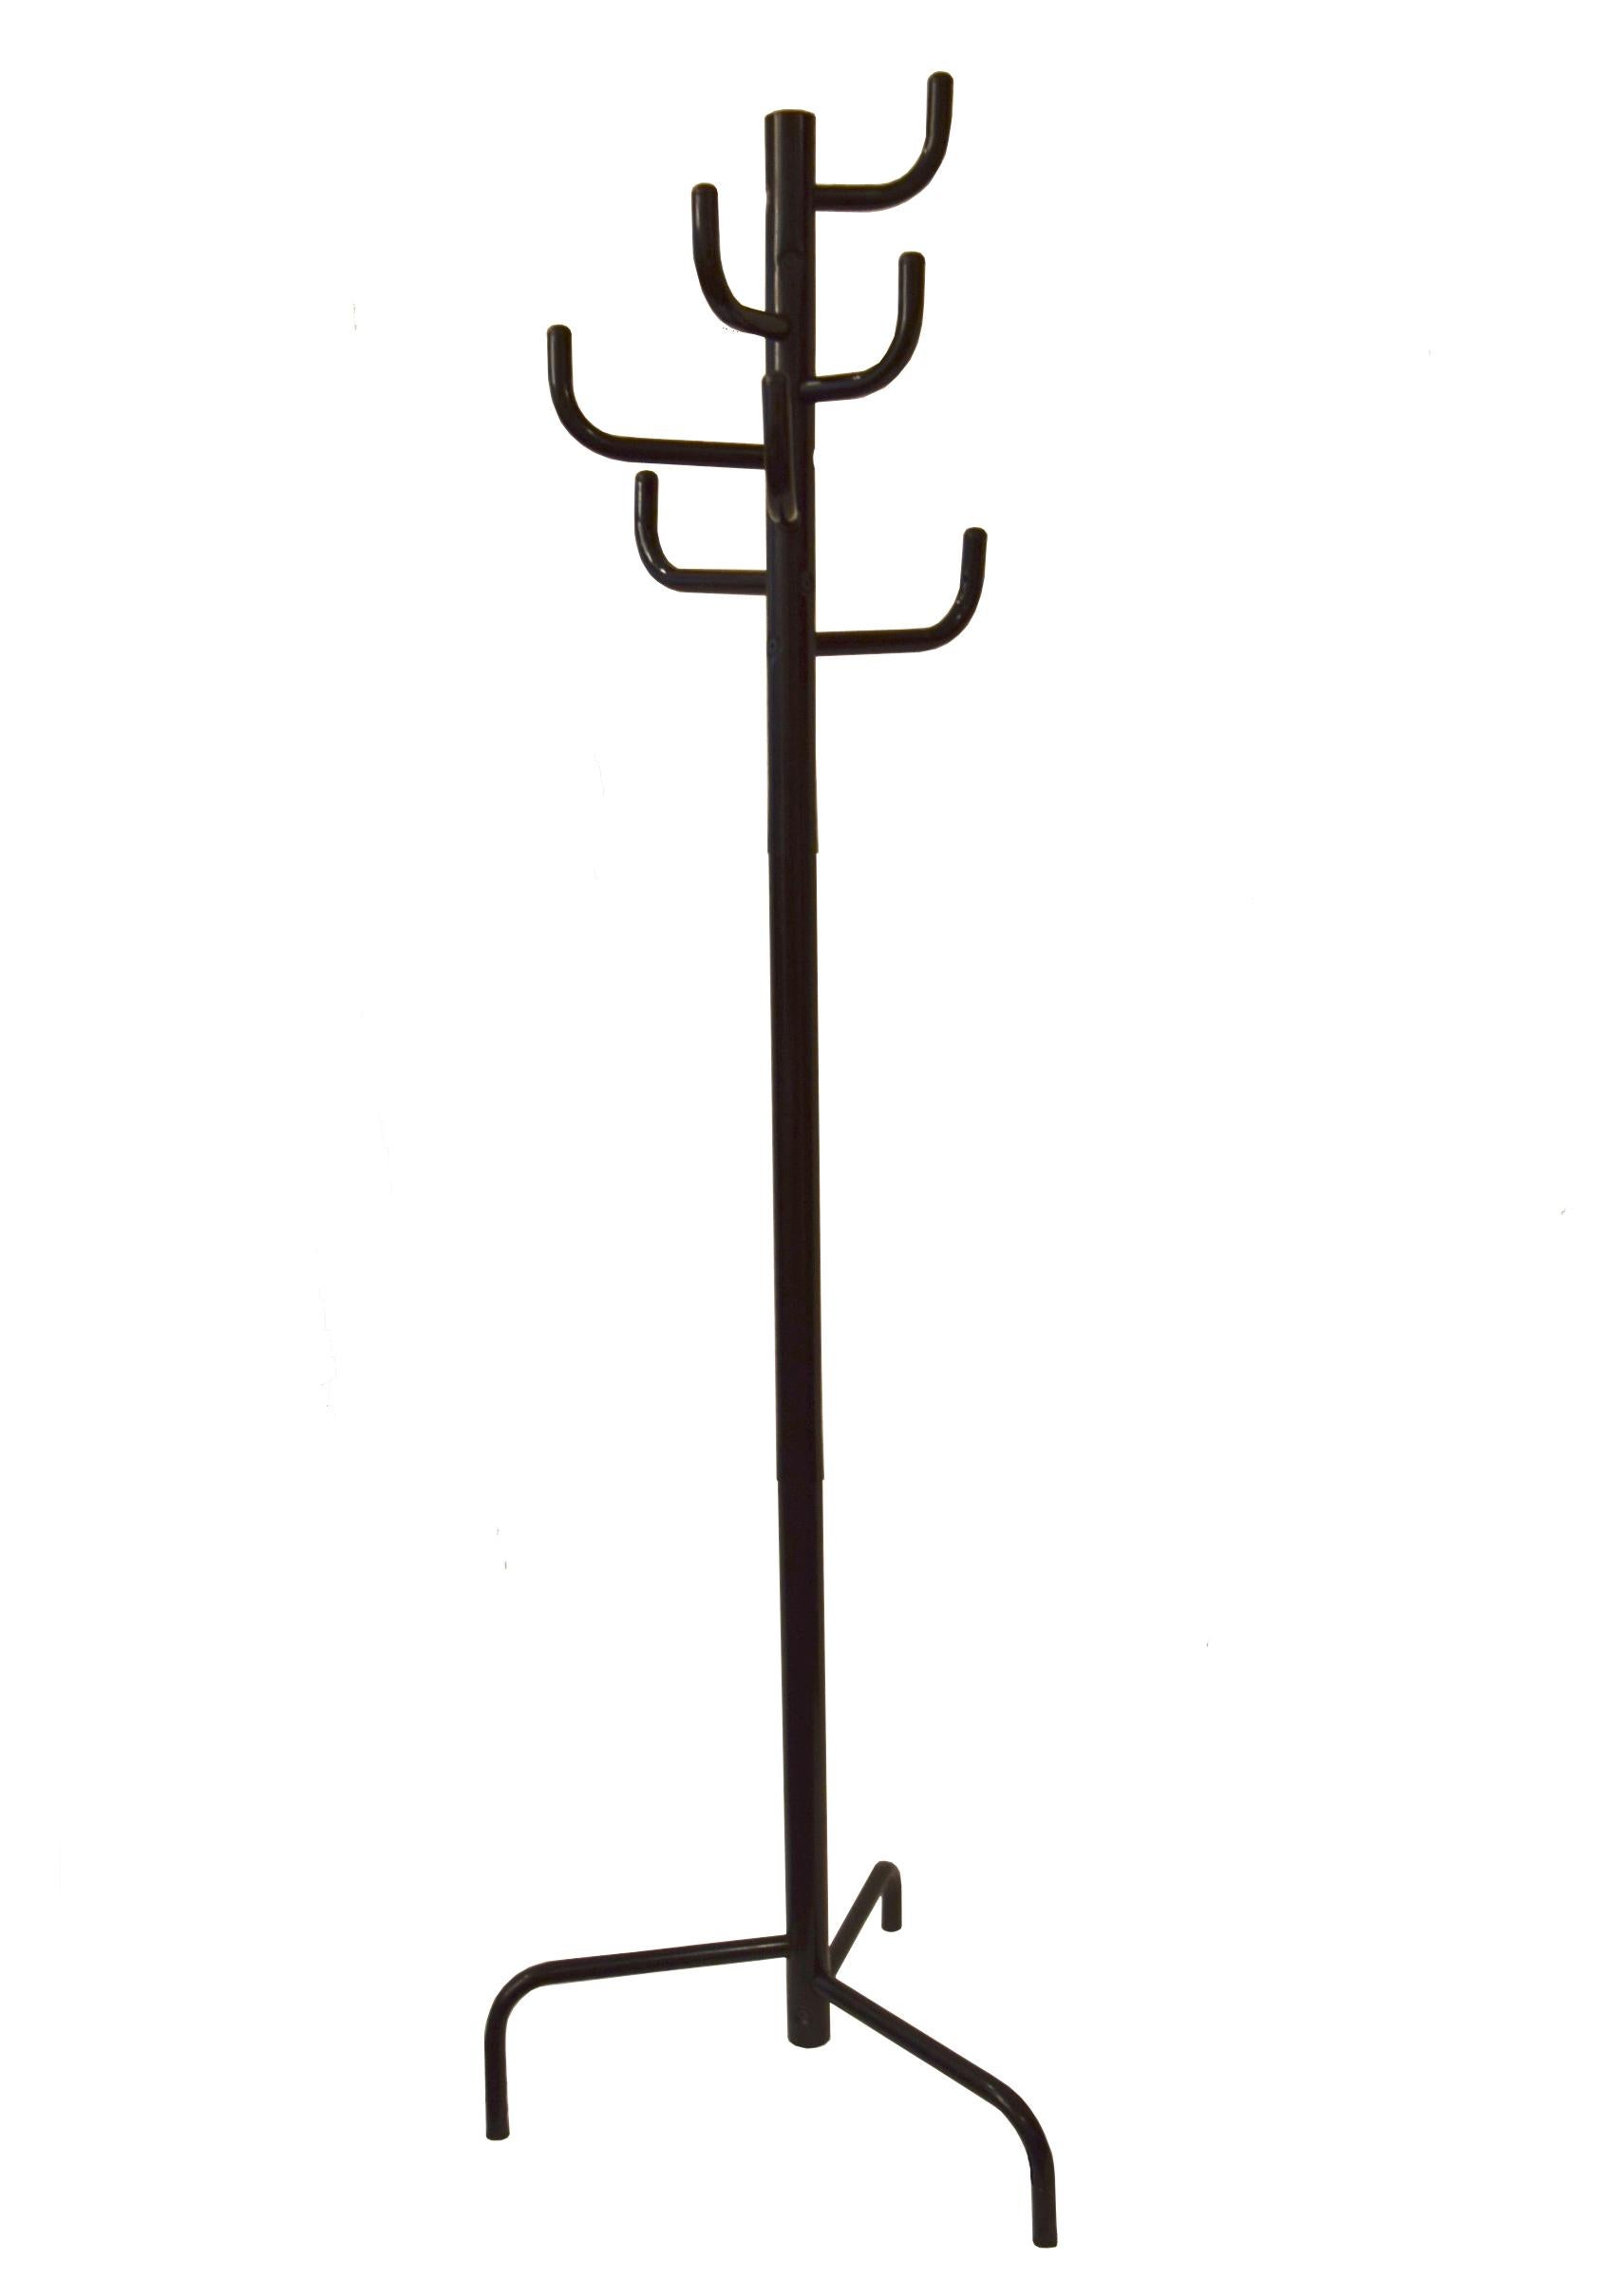 Free standing coat or hat rack in satin black enameled metal designed in 1979 by Rutger Andersson and produced by Ikea in the 1980s. There are seven arms / hooks that each have a rounded black molded plastic cap at the ends, and three legs at the